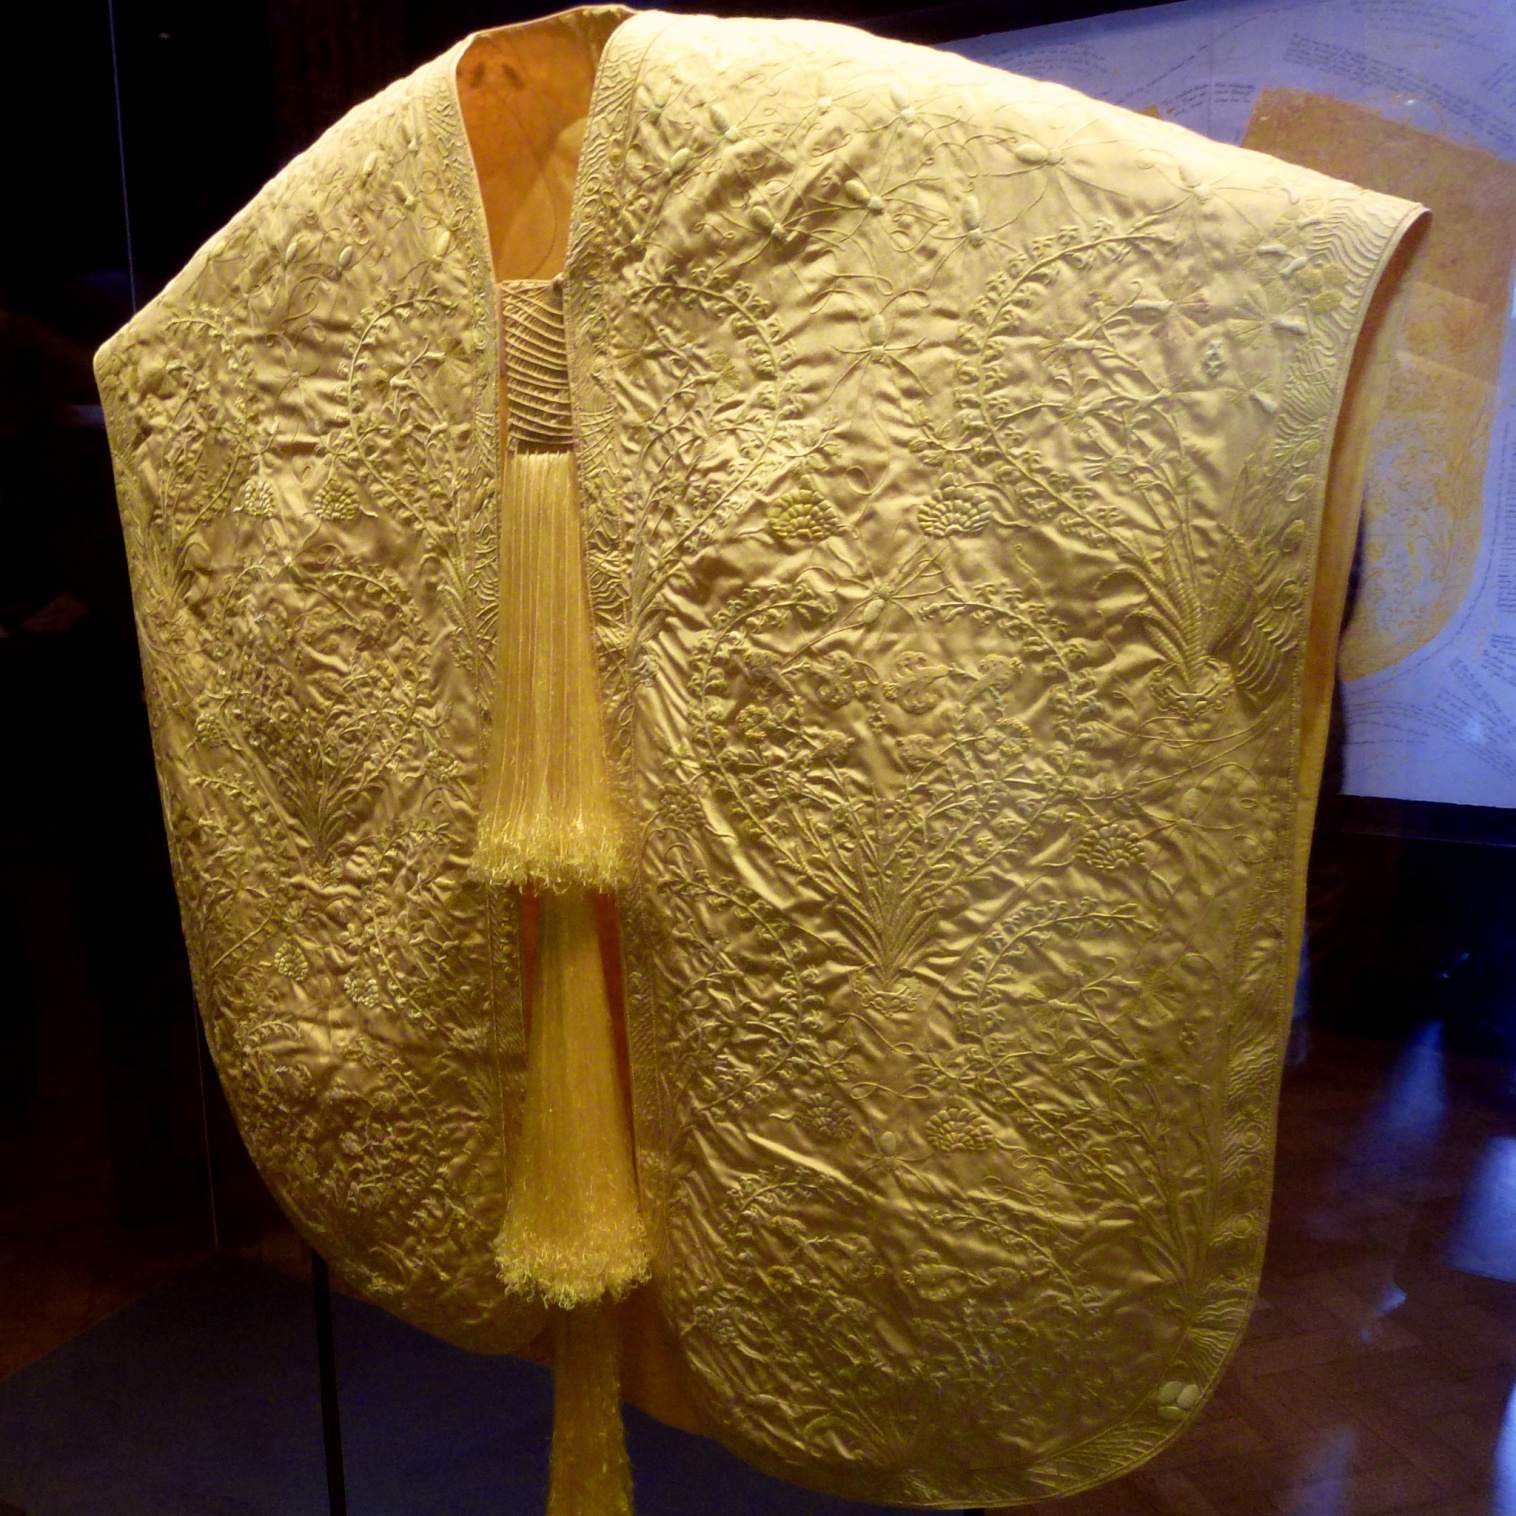 The golden cape, made from the silk of more than a million female Golden Orb Weaver spiders collected in the highlands of Madagascar exhibited at London's Victoria and Albert Museum in June 2012.